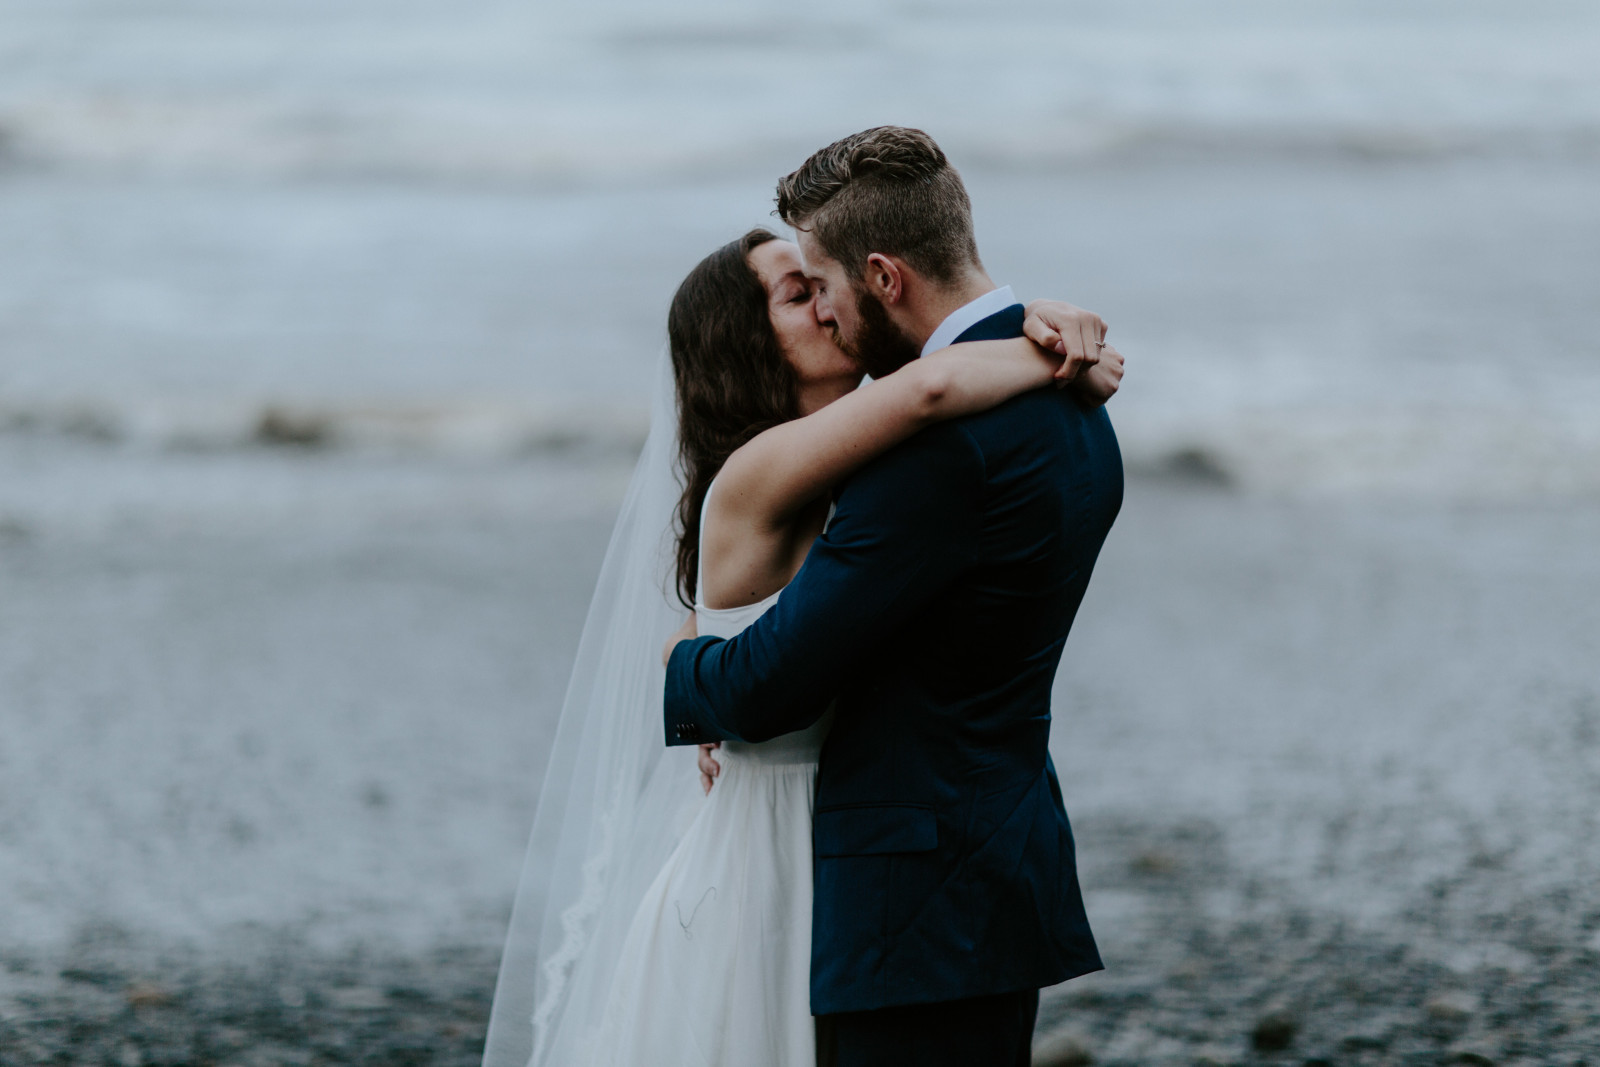 Mollie and Corey kiss. Elopement photography at Olympic National Park by Sienna Plus Josh.